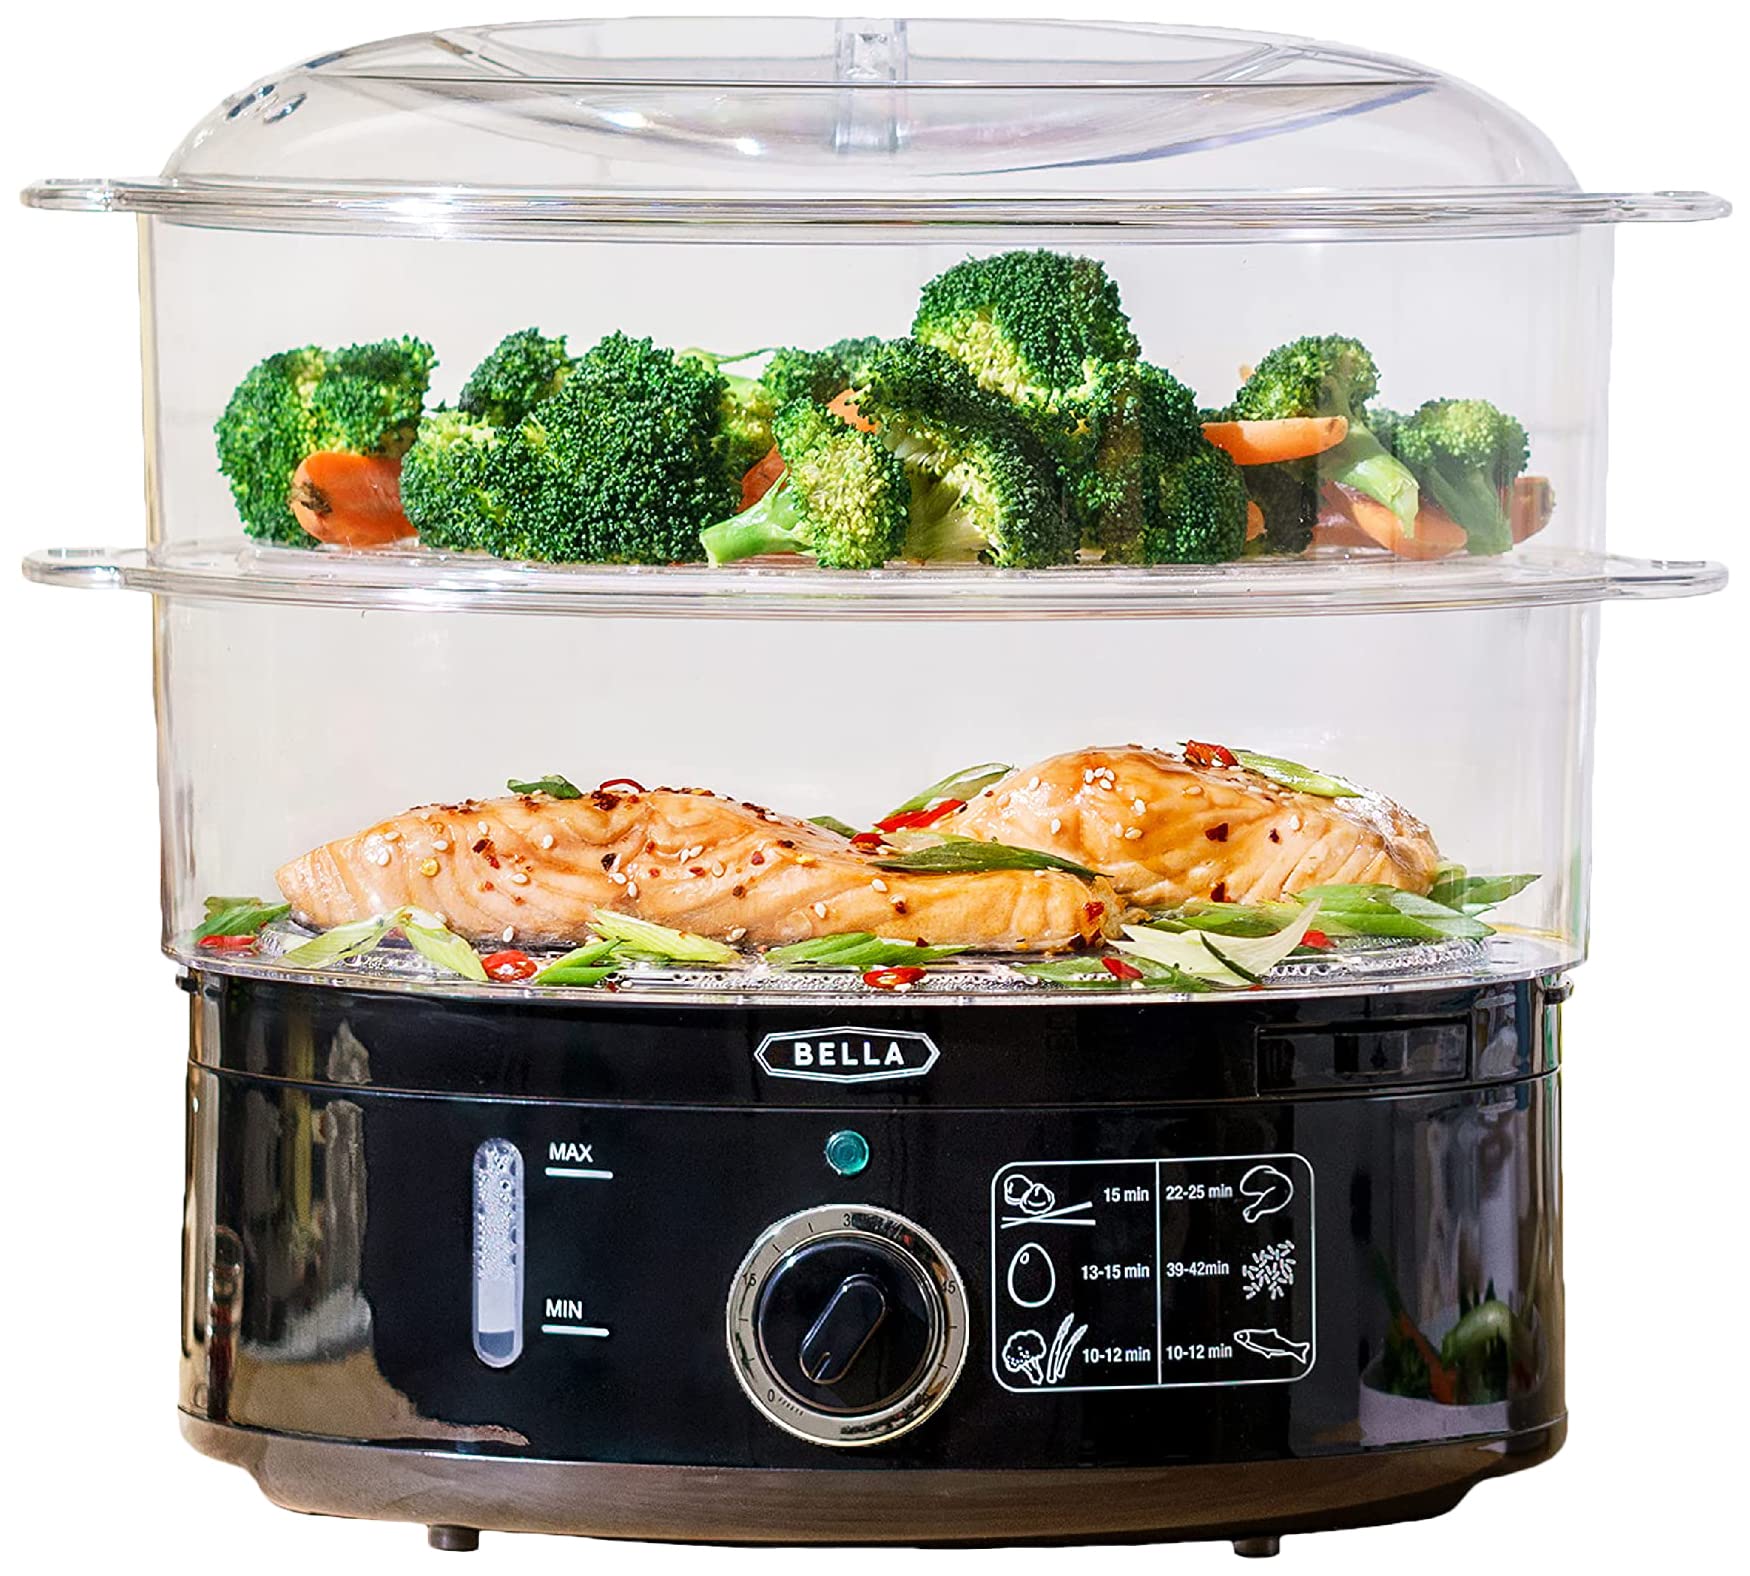 BELLA Two Tier Food Steamer with Dishwasher Safe Lids and Stackable Baskets & Removable Base for Fast Simultaneous Cooking - Auto Shutoff & Boil Dry Protection, 7.4 QT, Black